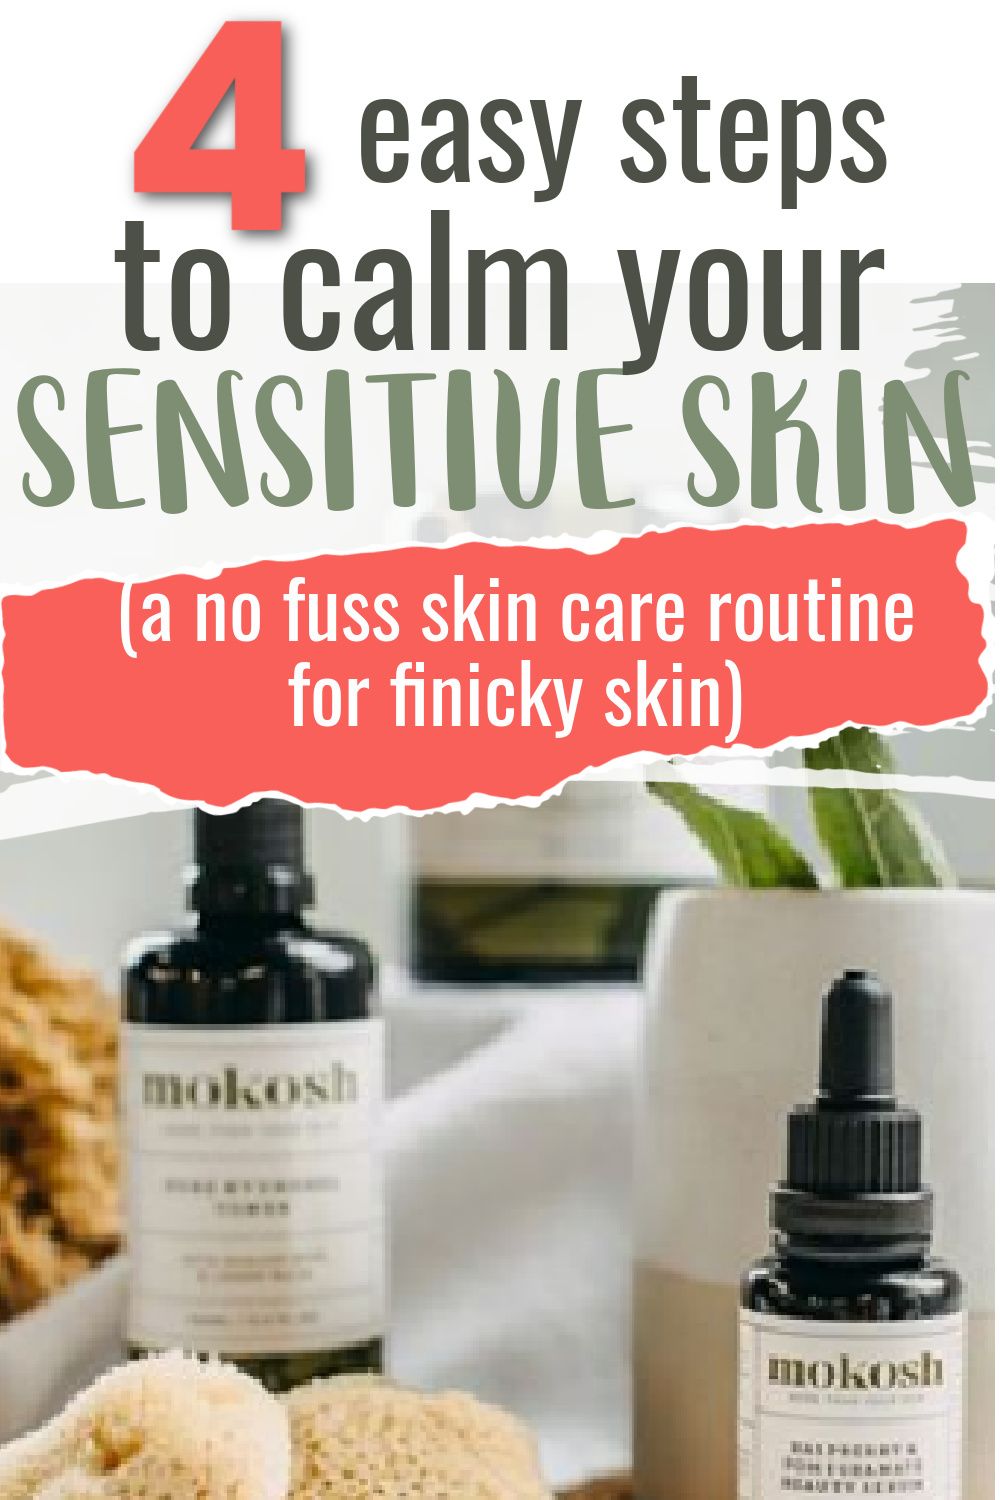 The best skincare routine for sensitive skin